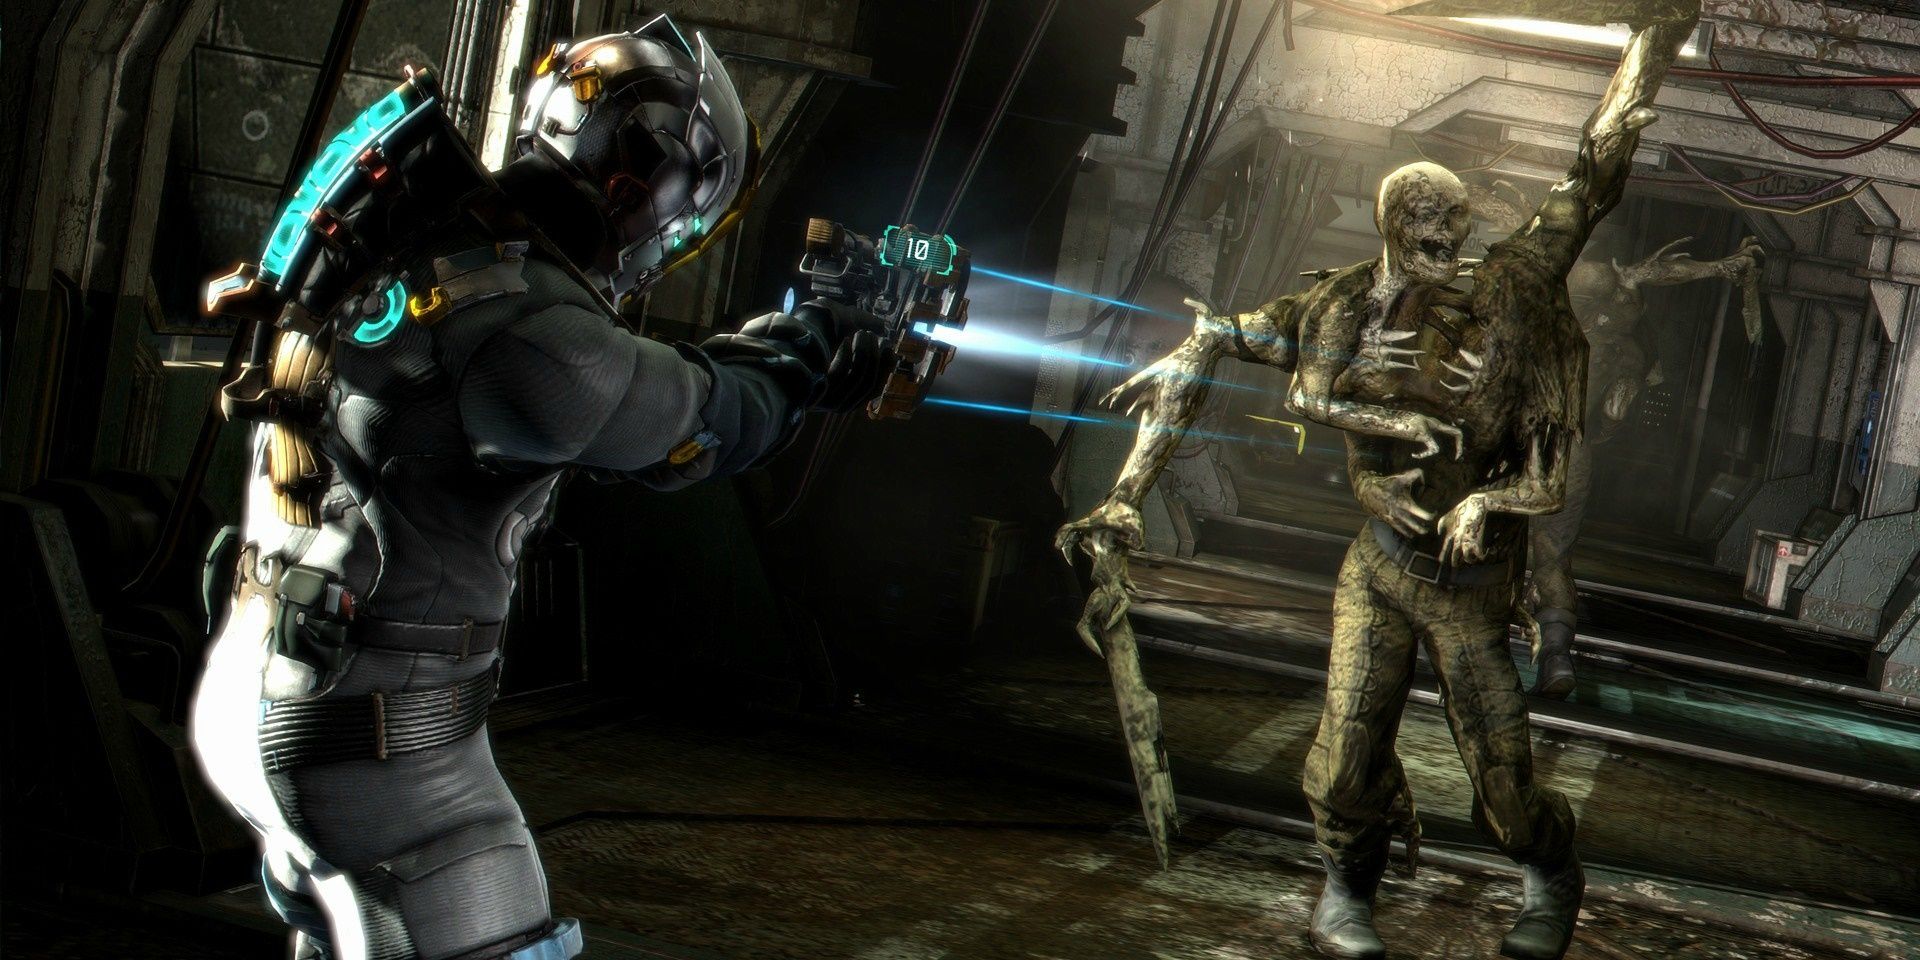 A monster approaching the player in Dead Space